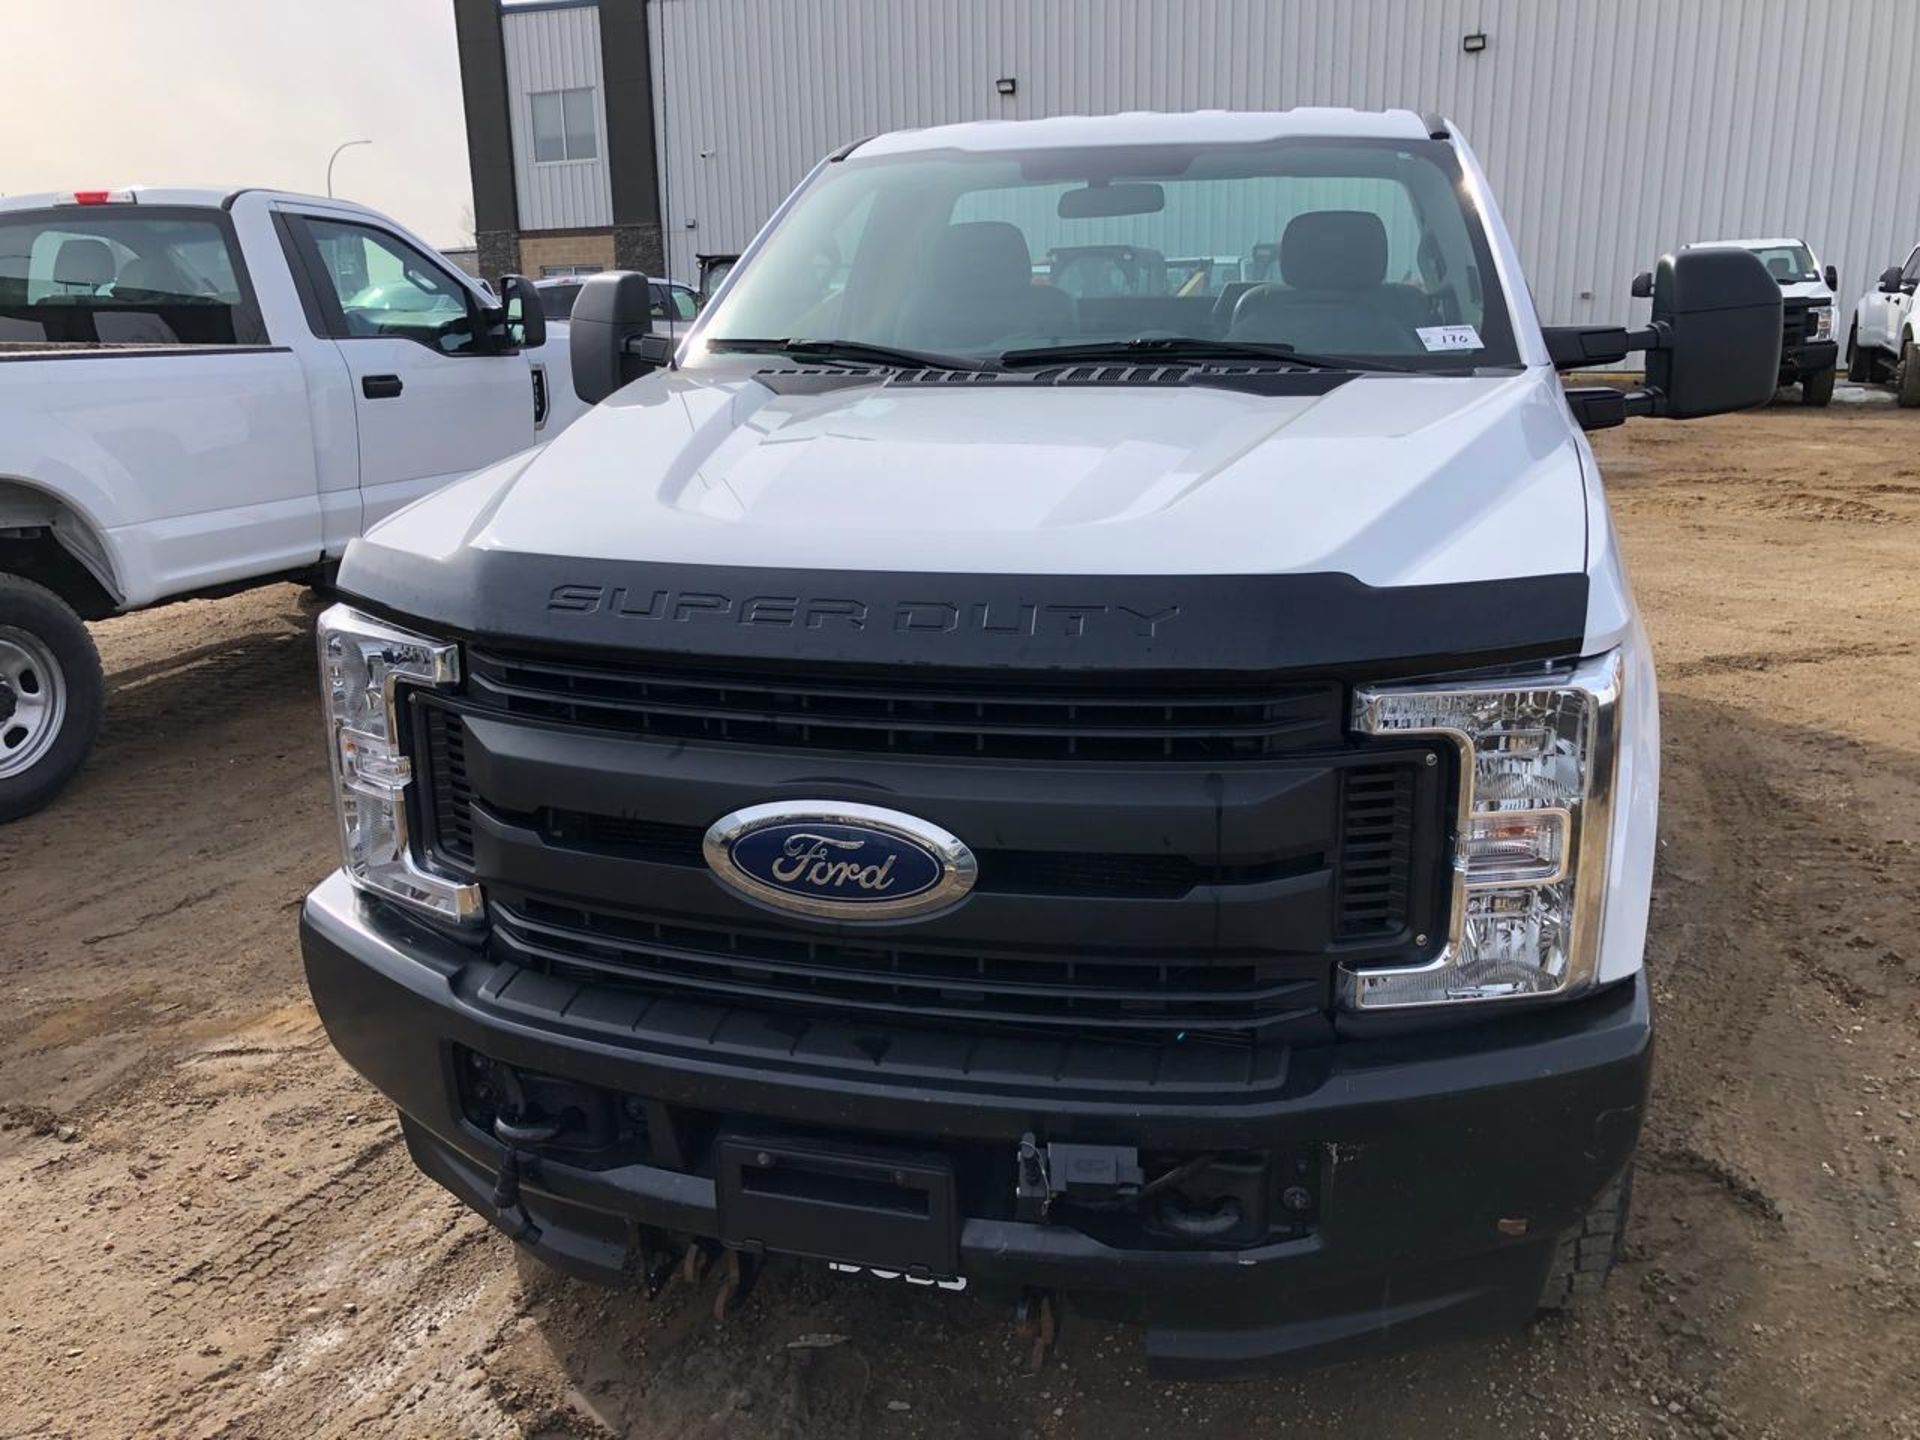 2017 Ford F350 SD Pick-up Truck - Image 2 of 9